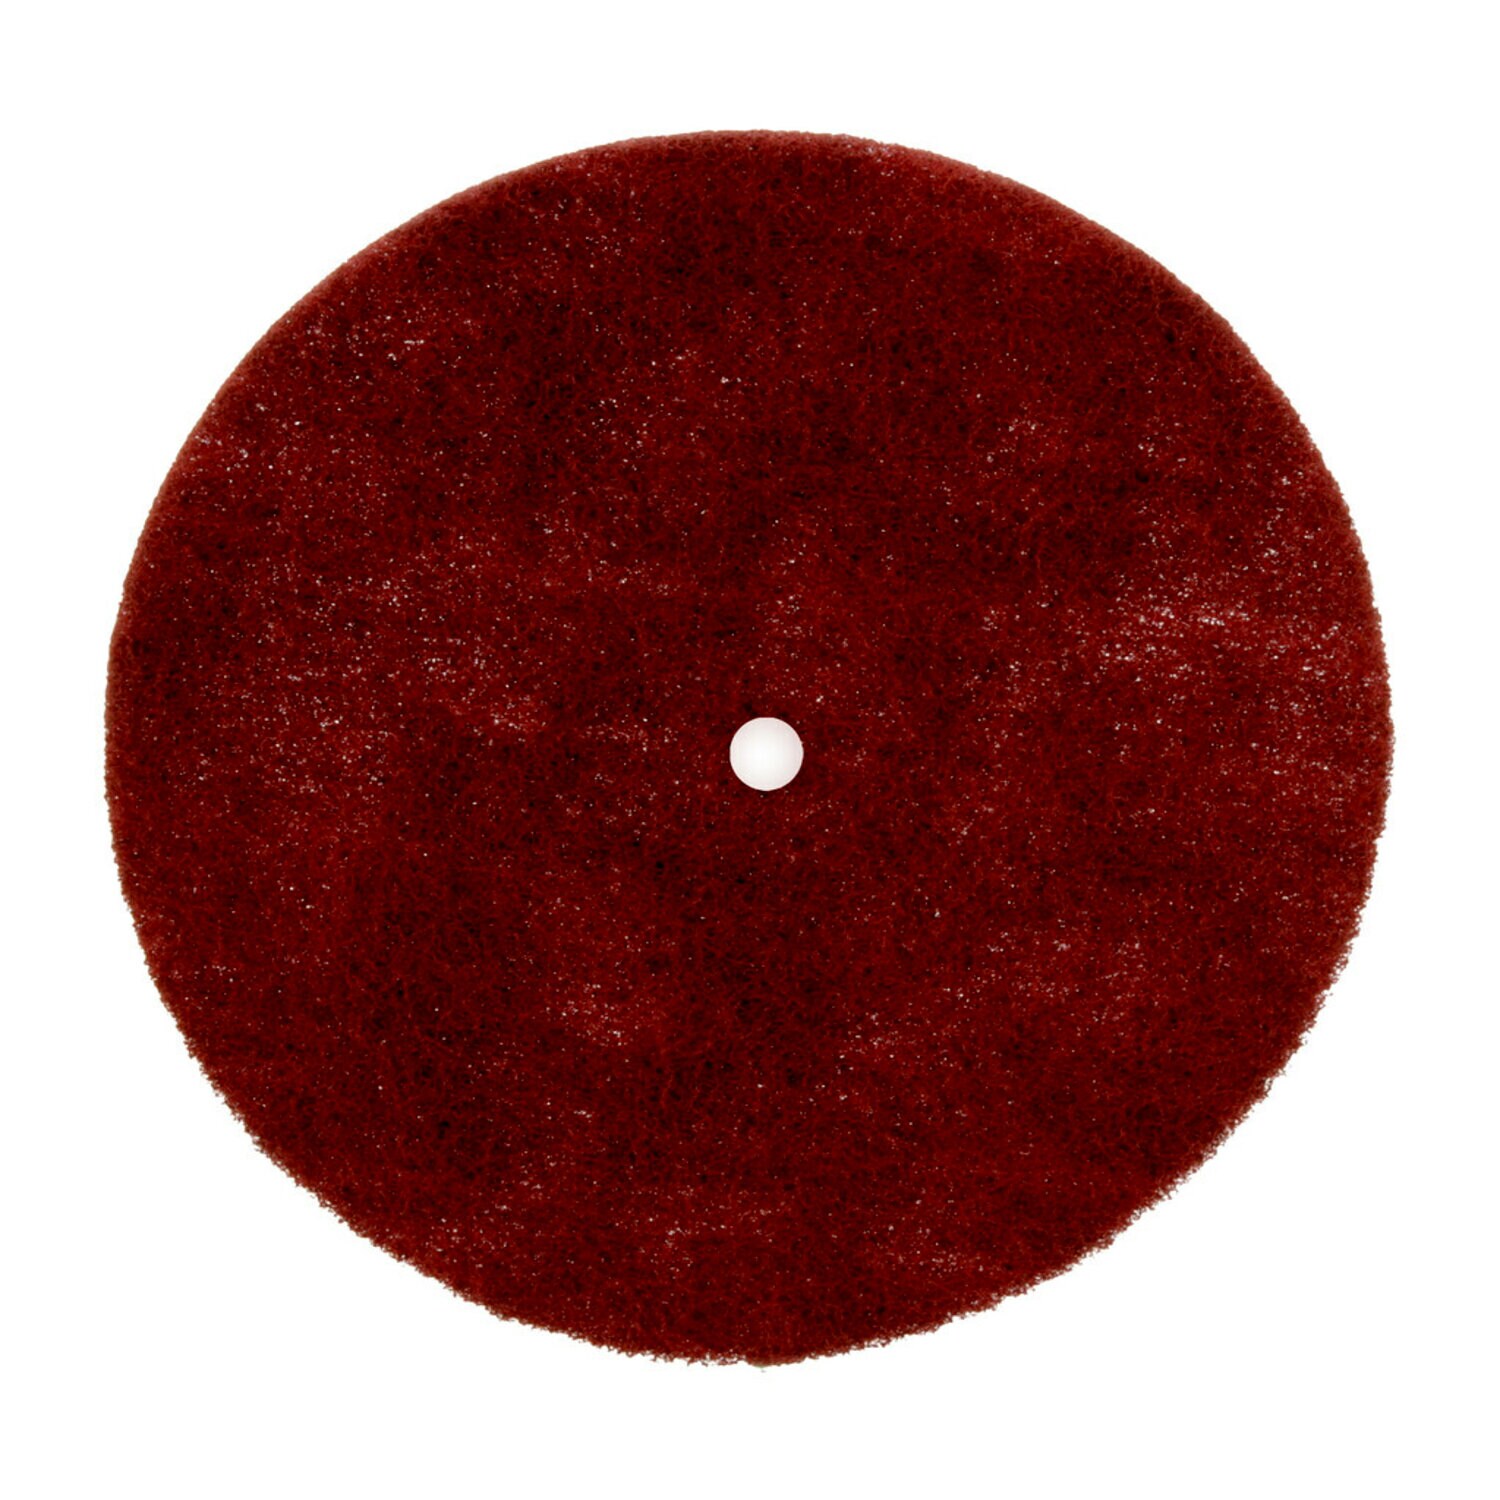 7010292747 - Standard Abrasives Buff and Blend HS Disc, 864006, 16 in x 1-1/4 in A
VFN, 10 ea/Case